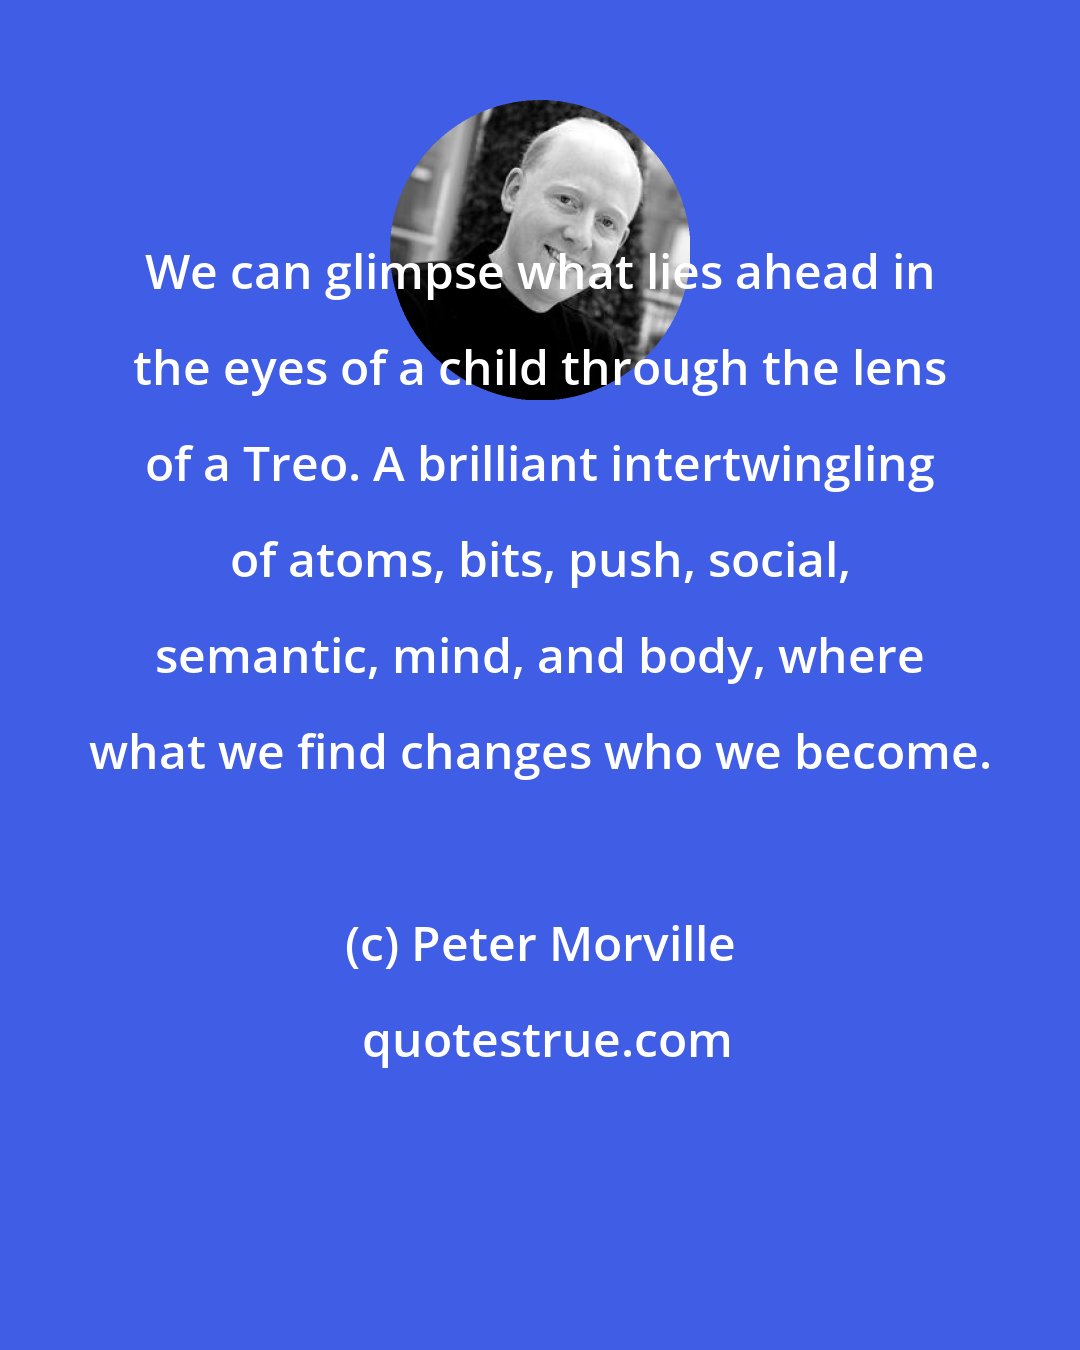 Peter Morville: We can glimpse what lies ahead in the eyes of a child through the lens of a Treo. A brilliant intertwingling of atoms, bits, push, social, semantic, mind, and body, where what we find changes who we become.